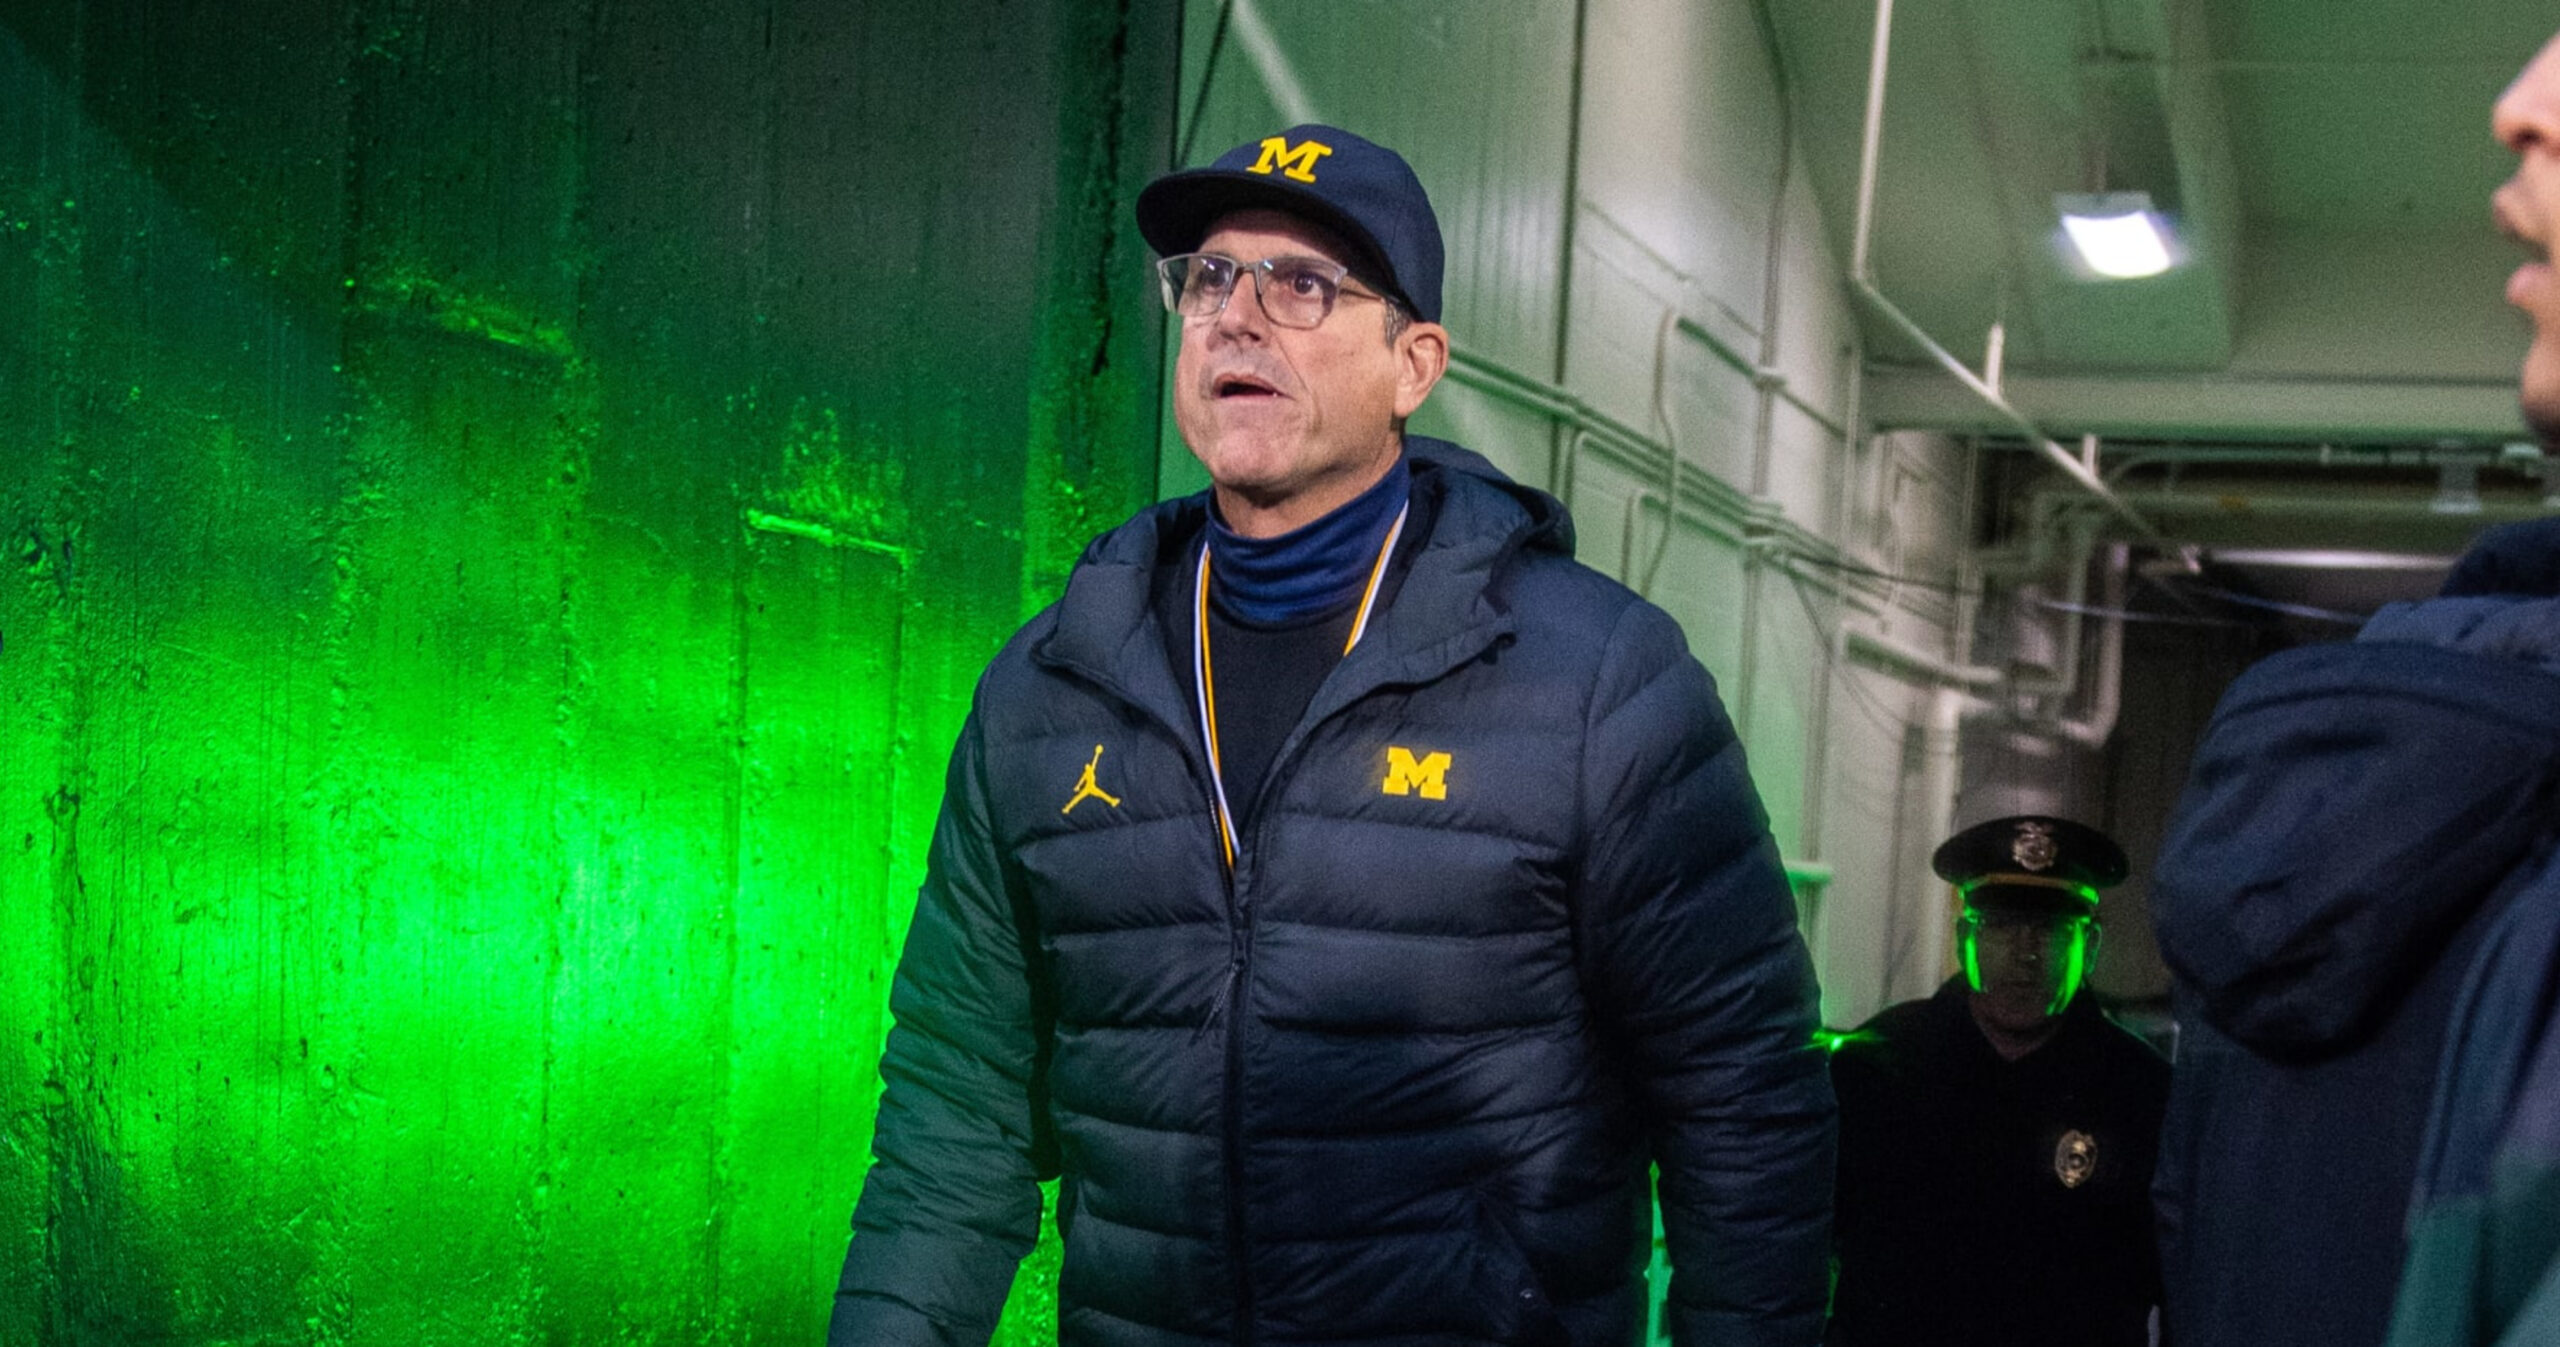 Report: Jim Harbaugh Contract Offer Rescinded by Michigan Amid Sign-Stealing Probe